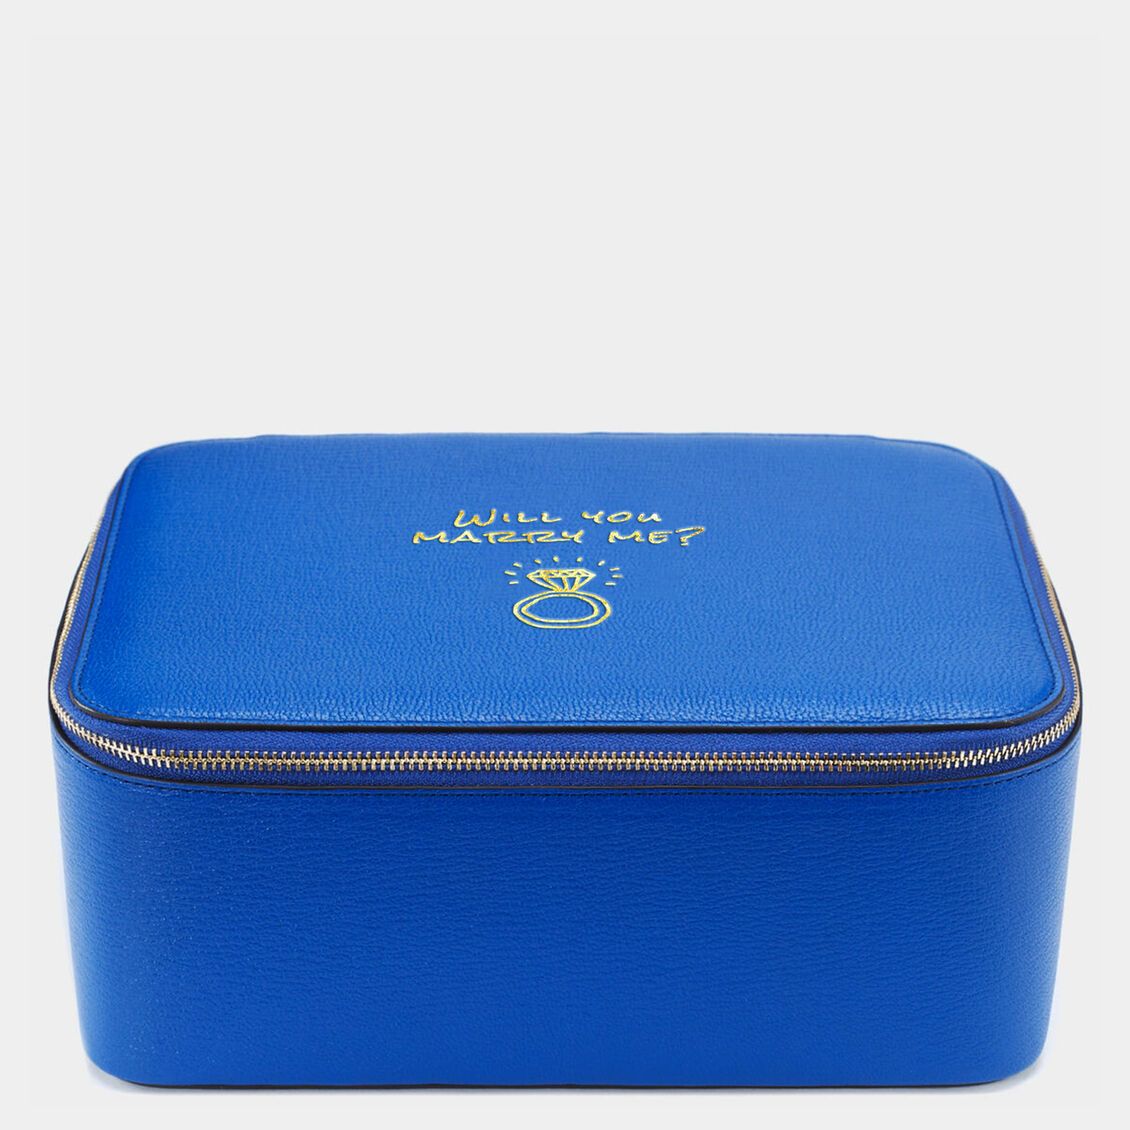 Yes No Maybe Wow Box XL -

                  
                    Capra Leather in Electric Blue -
                  

                  Anya Hindmarch US
